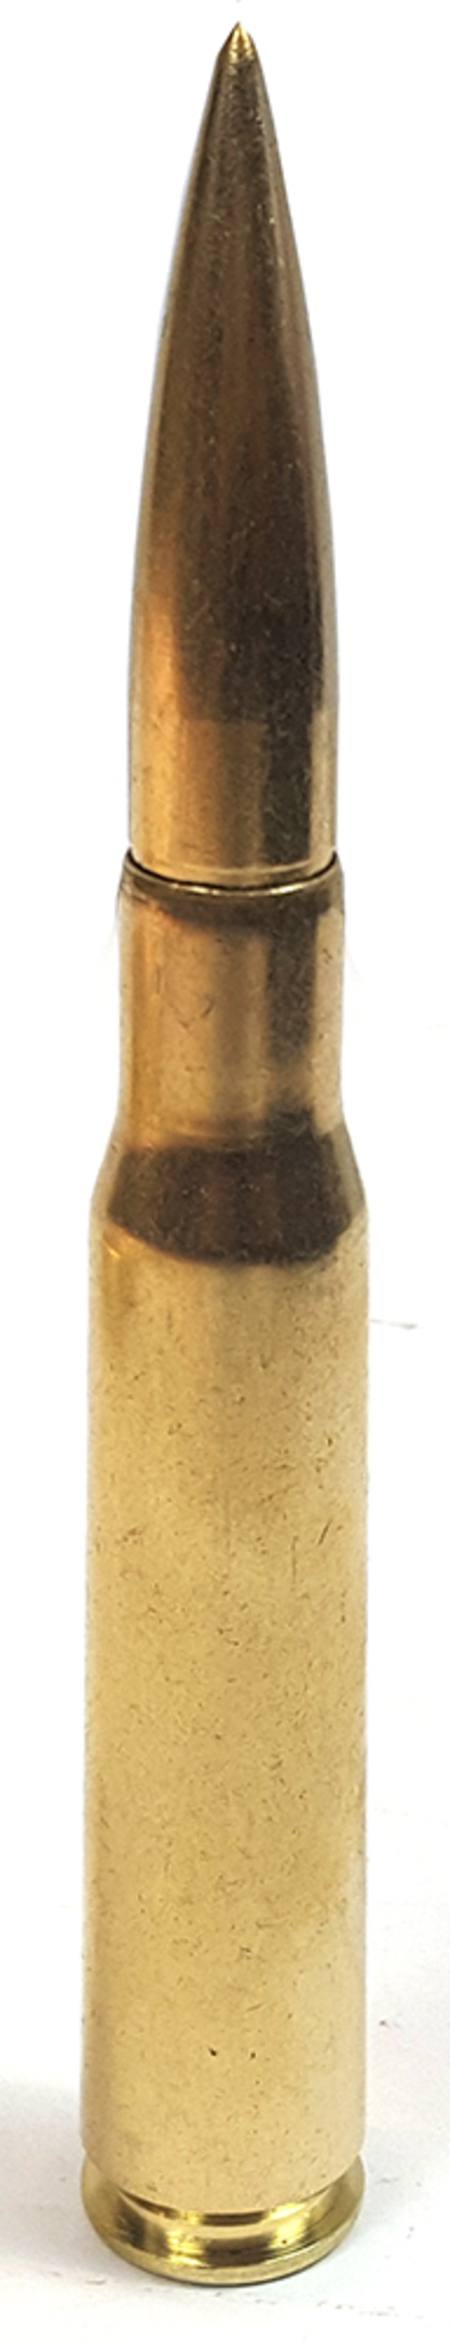 Buy Inert 50cal Bullet and Brass *no licence needed!* in NZ.